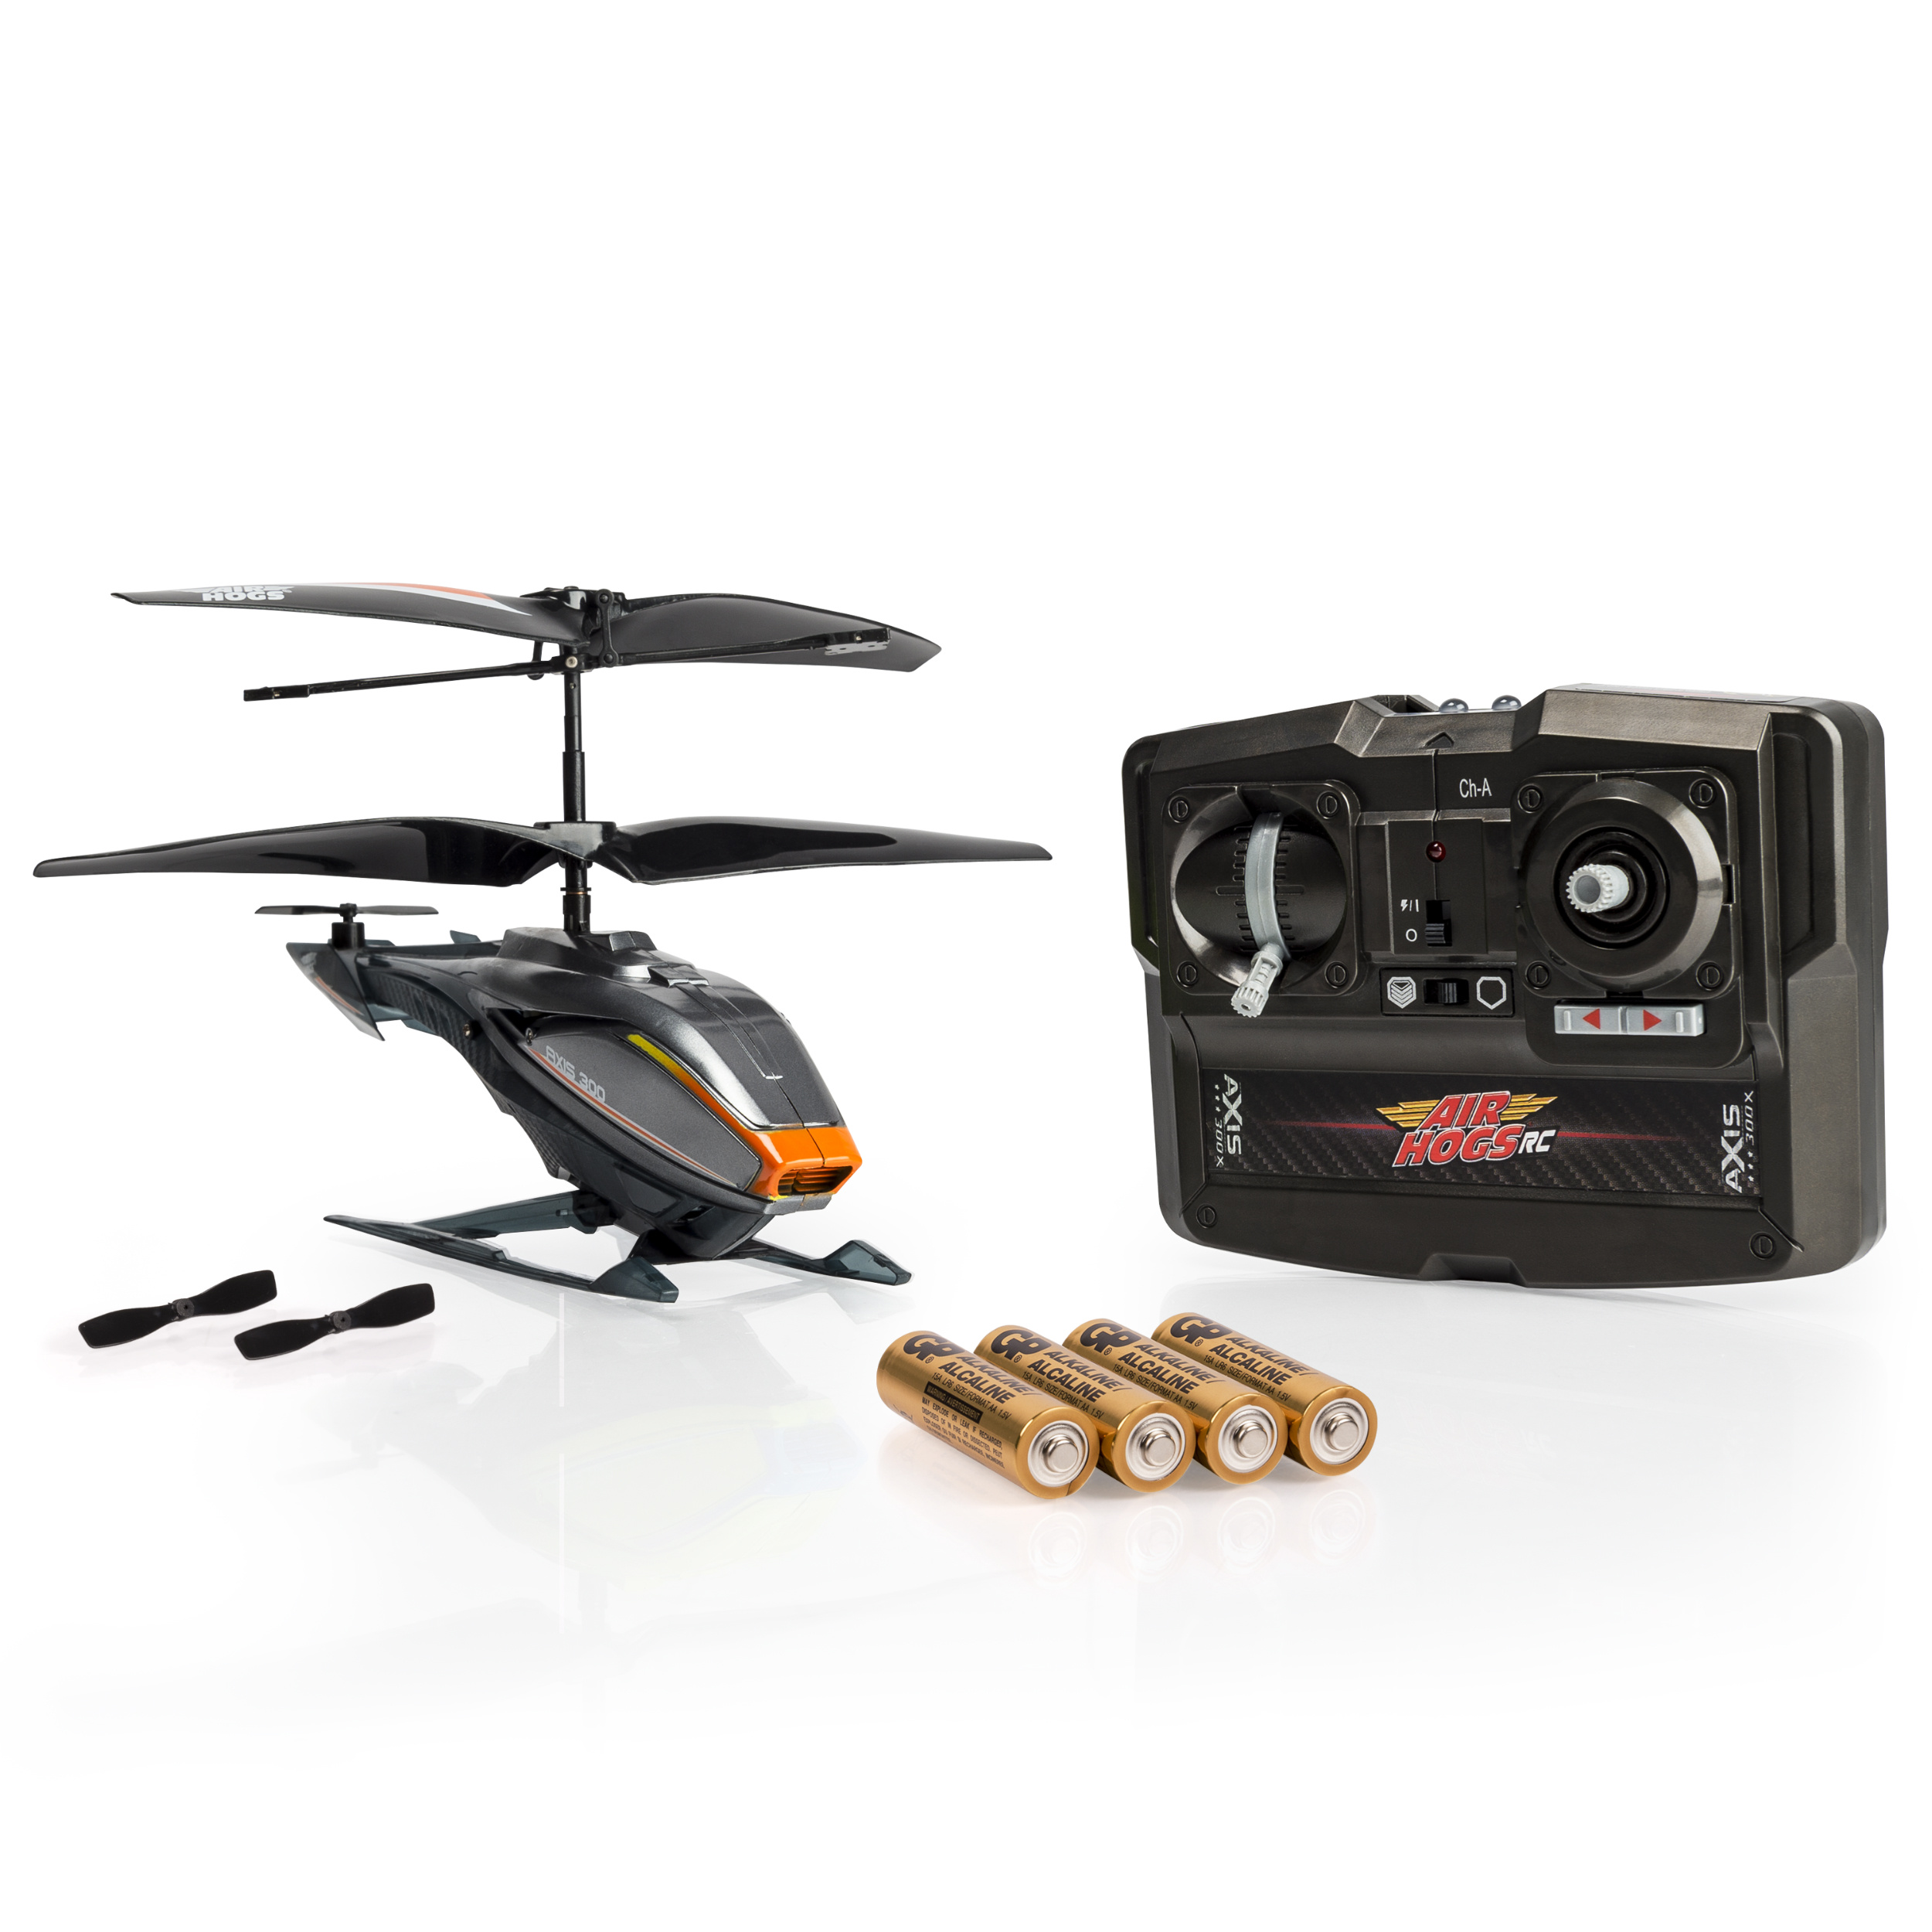 Air Hogs RC Axis 300X, Gray R/C Helicopter with Batteries - image 1 of 6